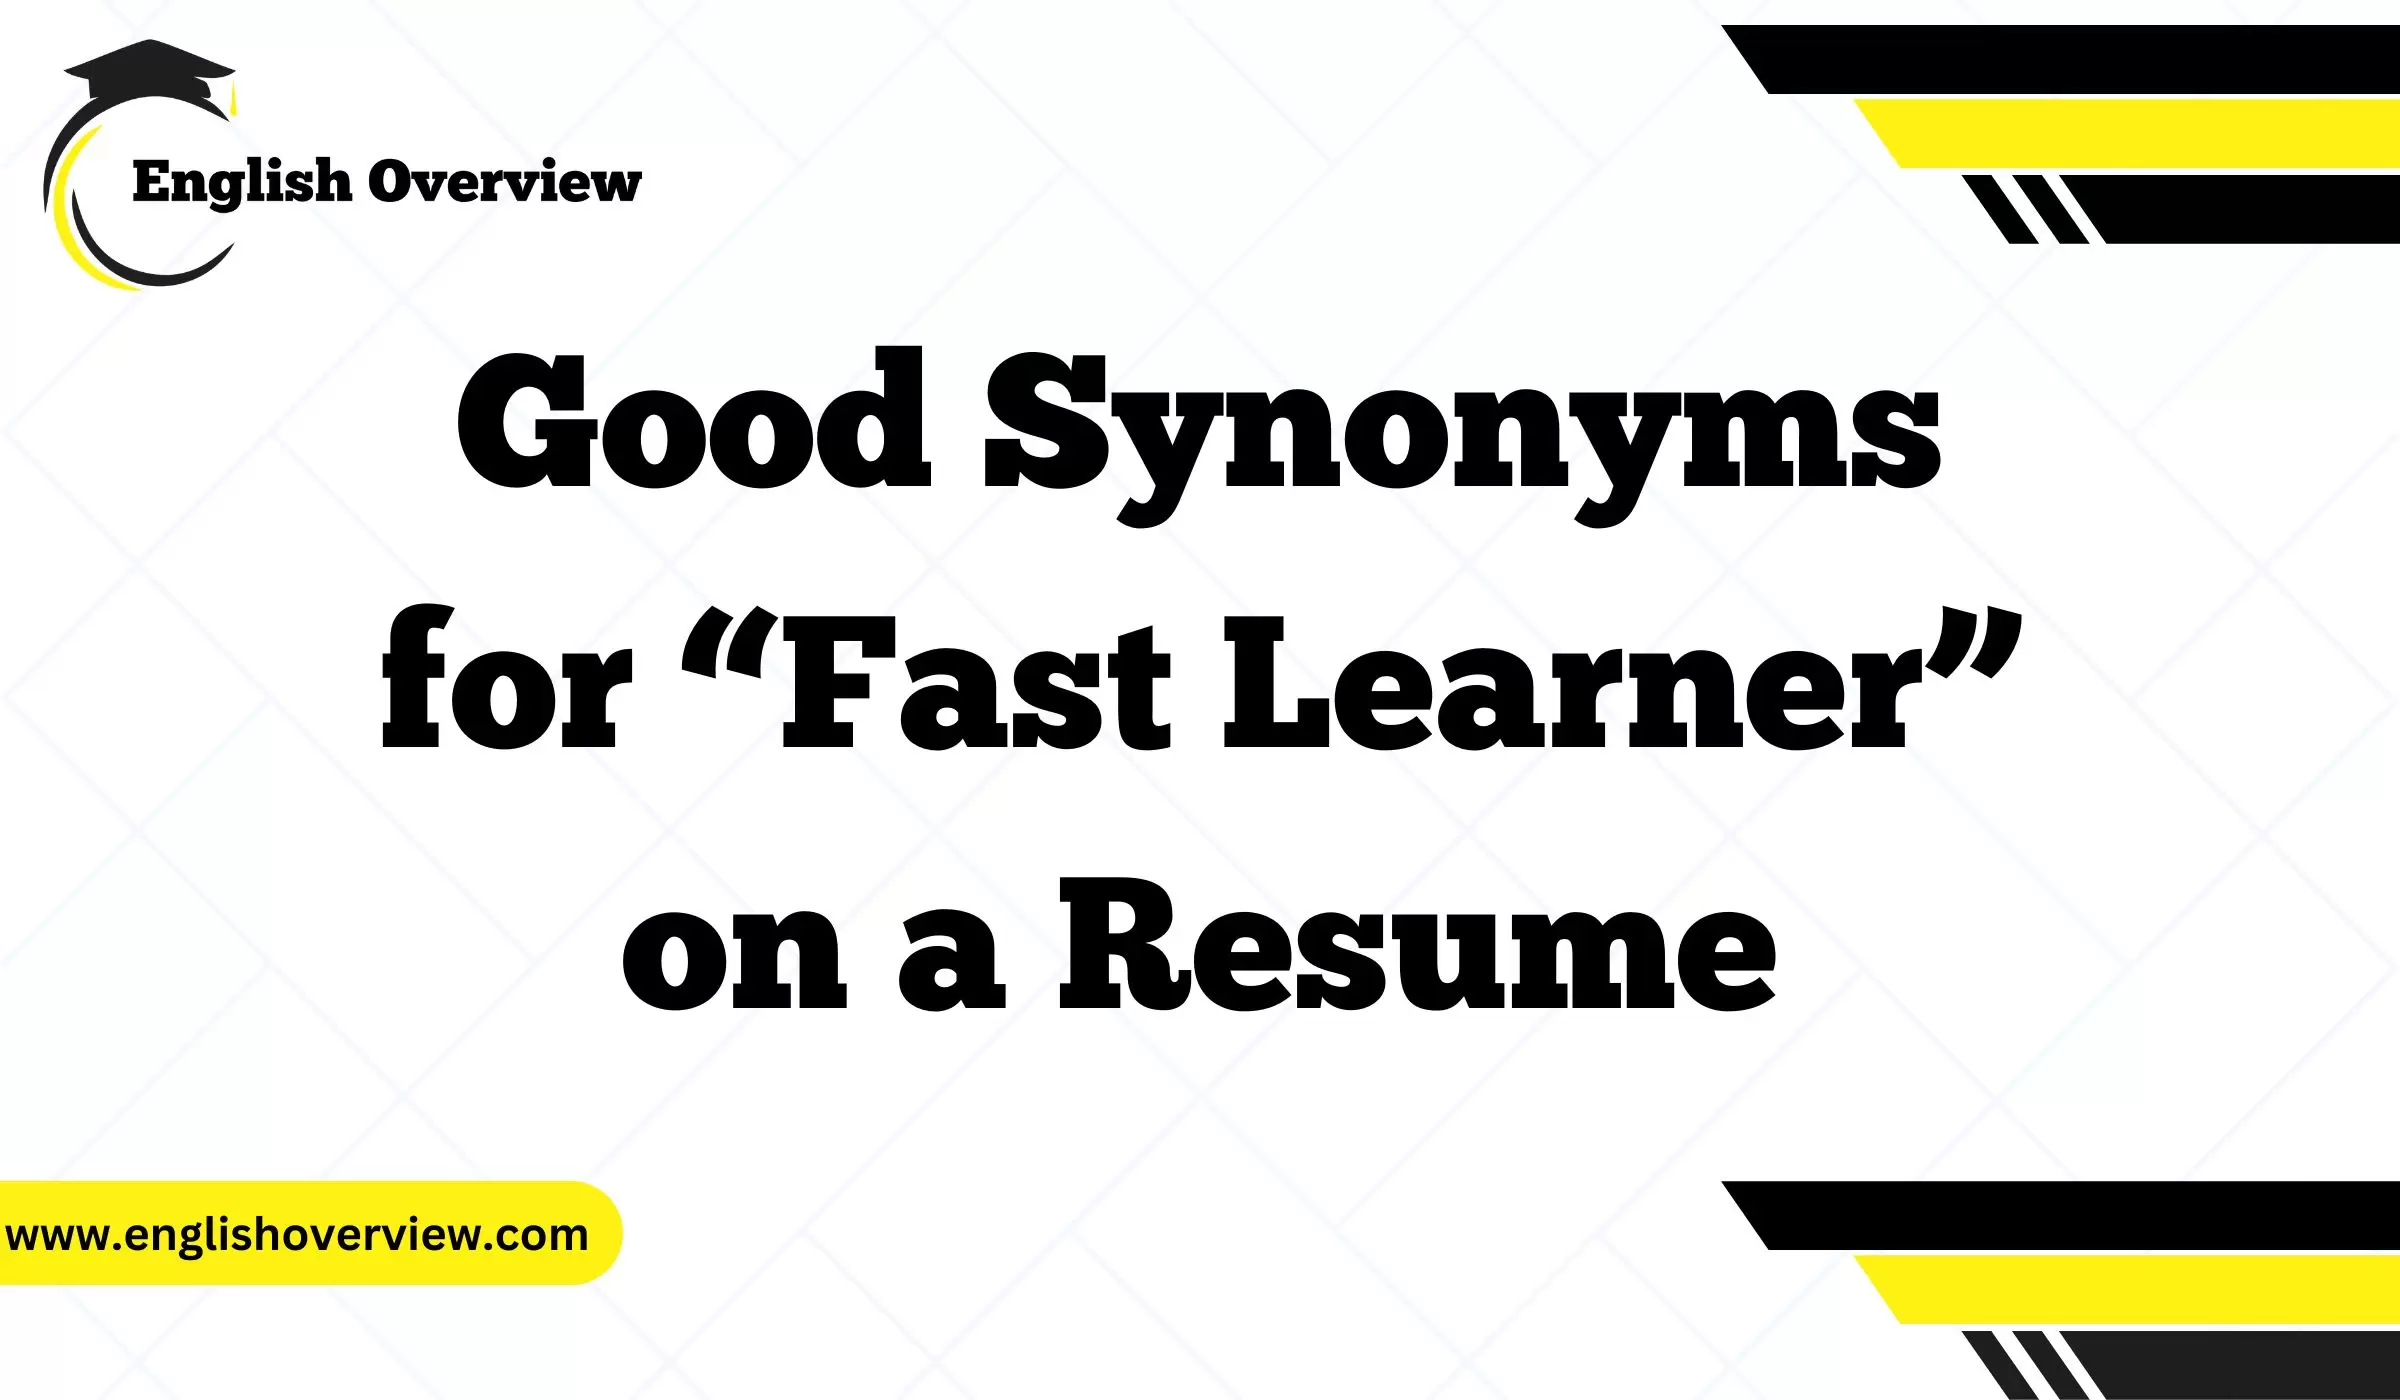 Good Synonyms for “Fast Learner” on a Resume